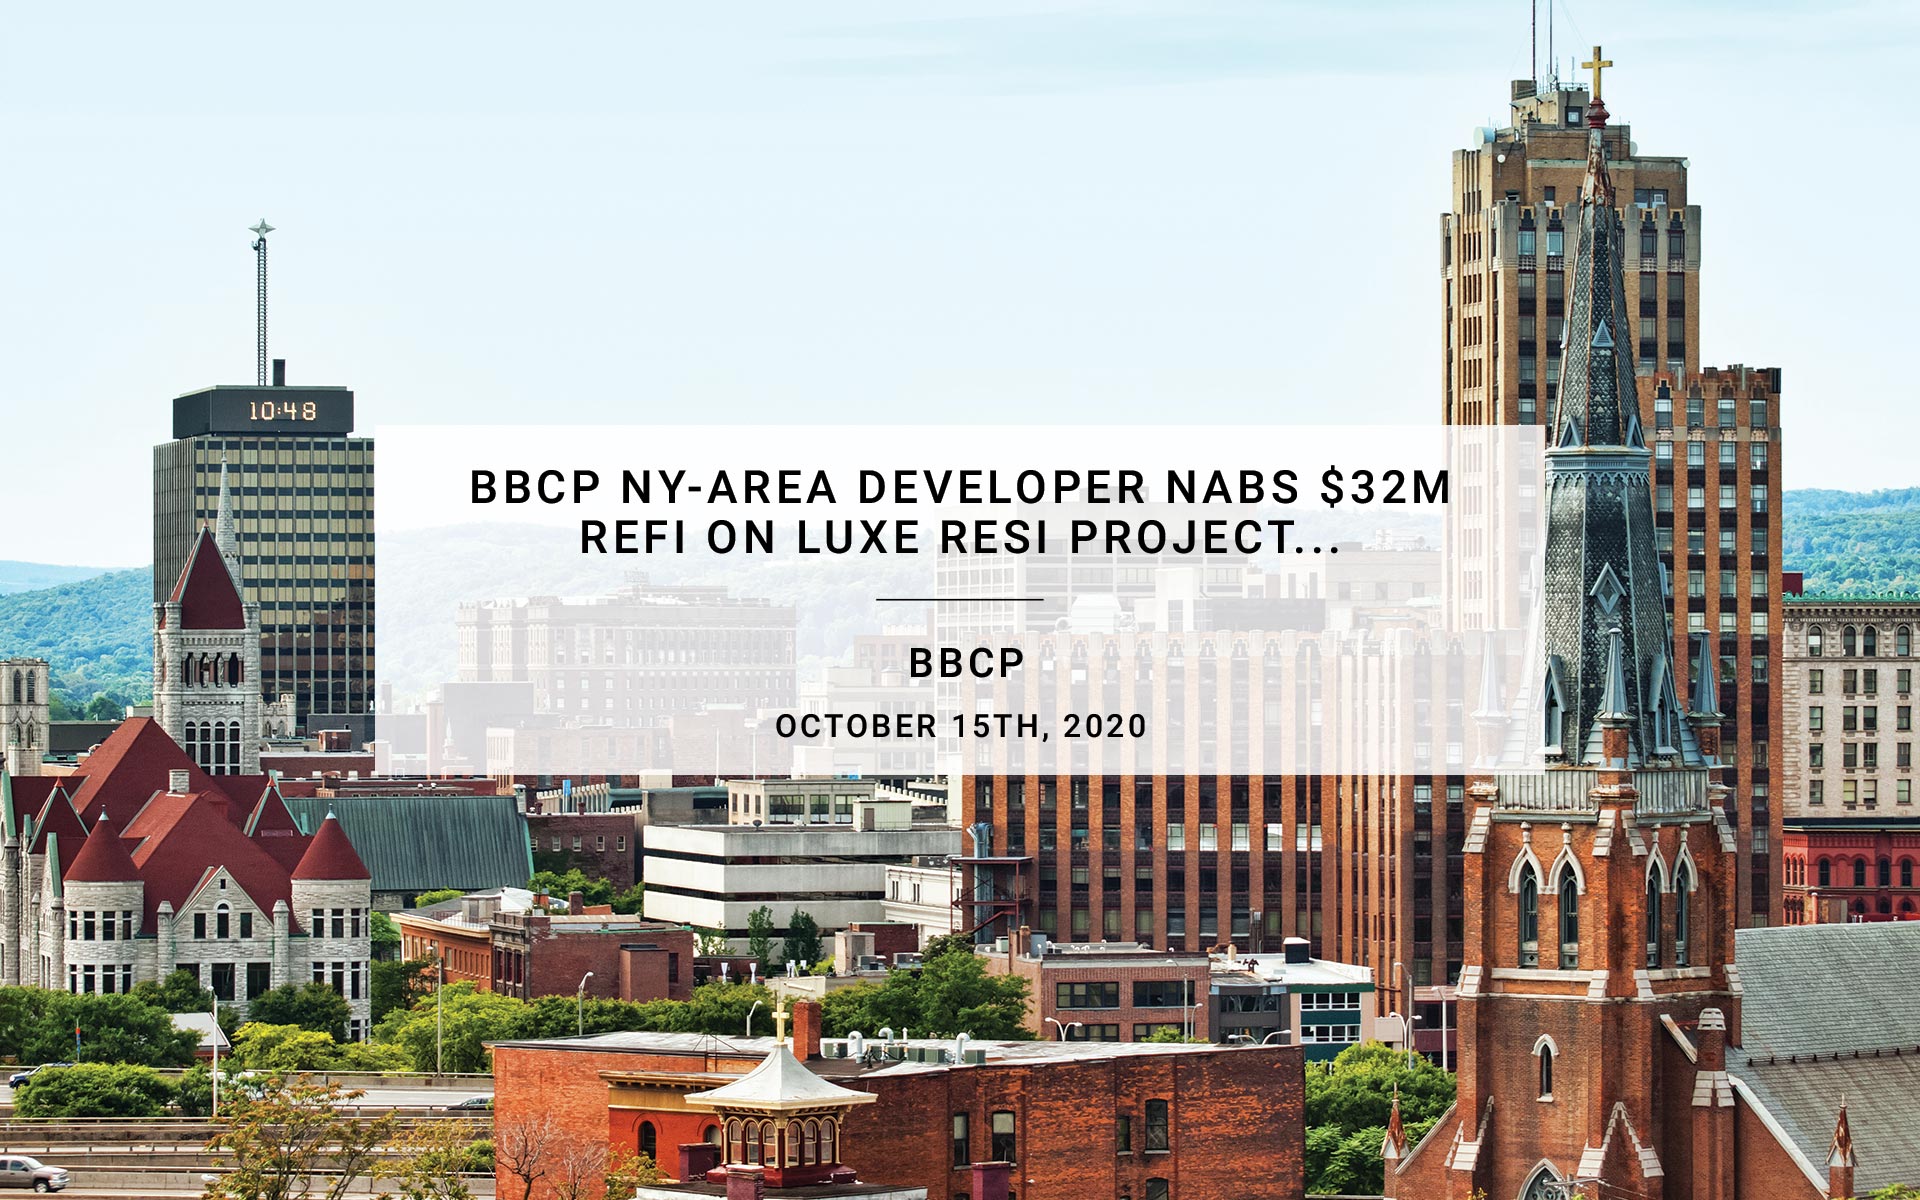 BBCP NY-Area Developer nabs $32m refi on luxe resi project | BBCP